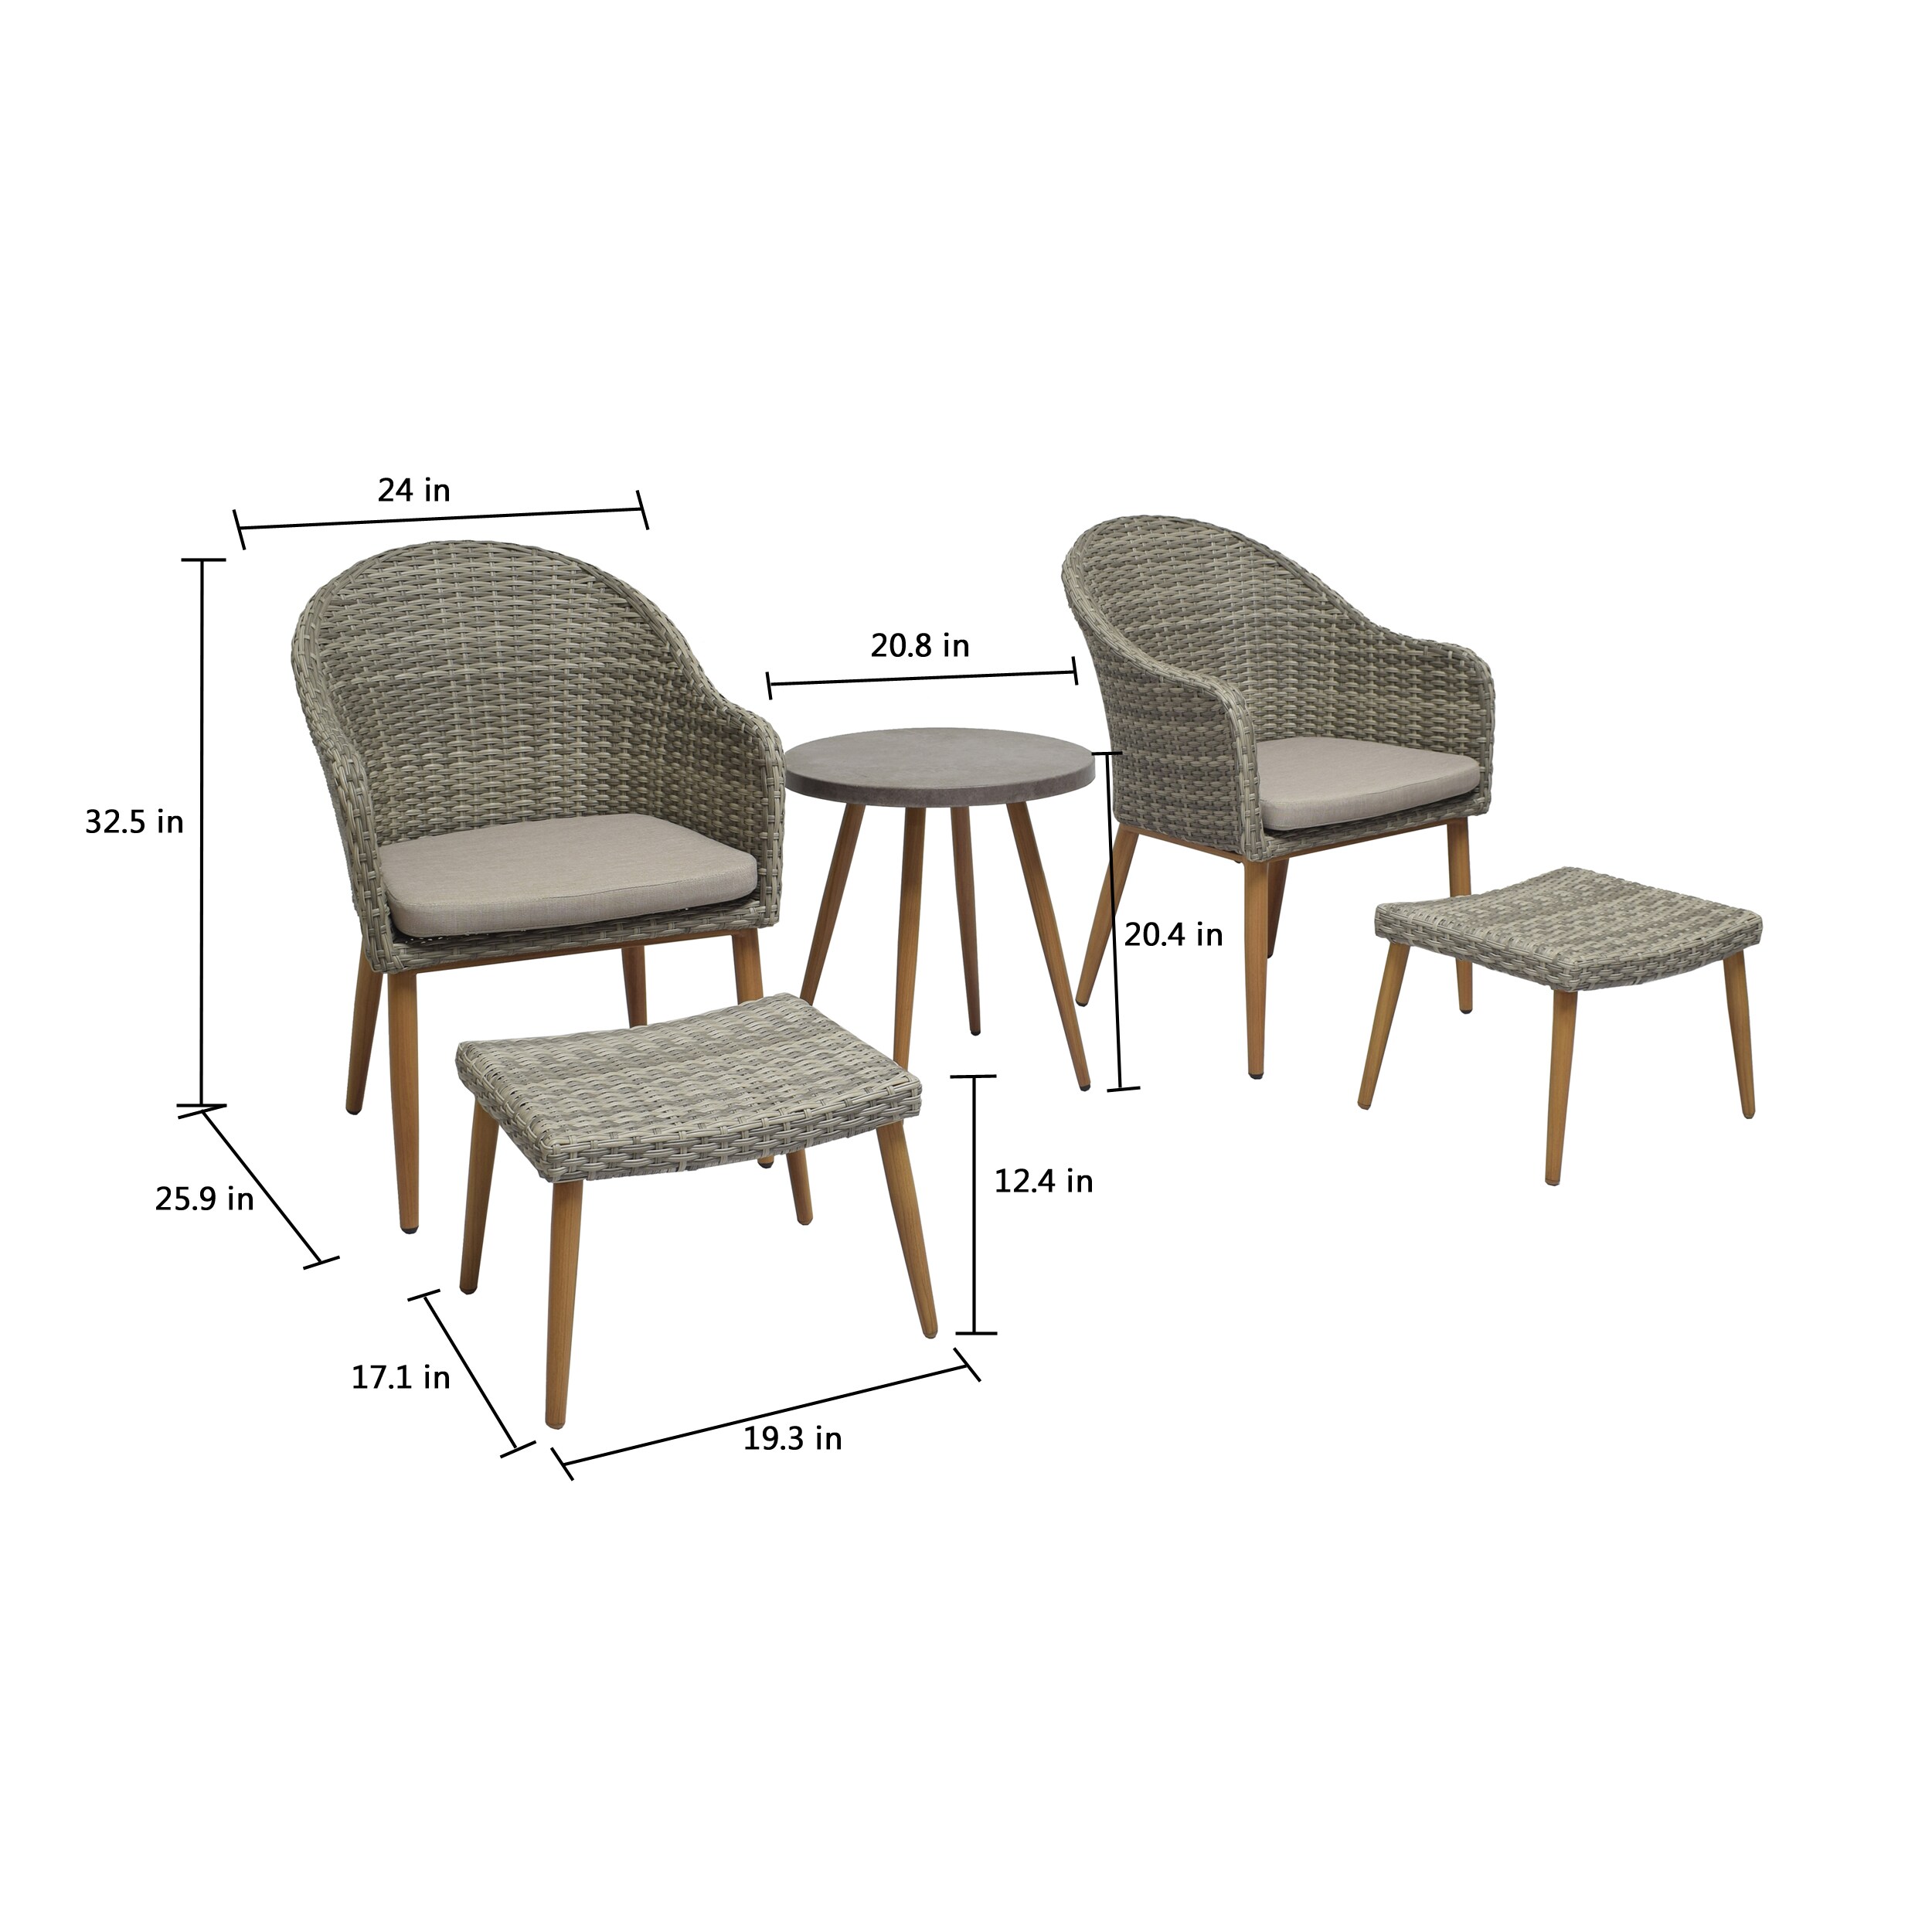 Style at Patio Off-white with Set Cushions Hembstead Wicker Selections 5-Piece Conversation